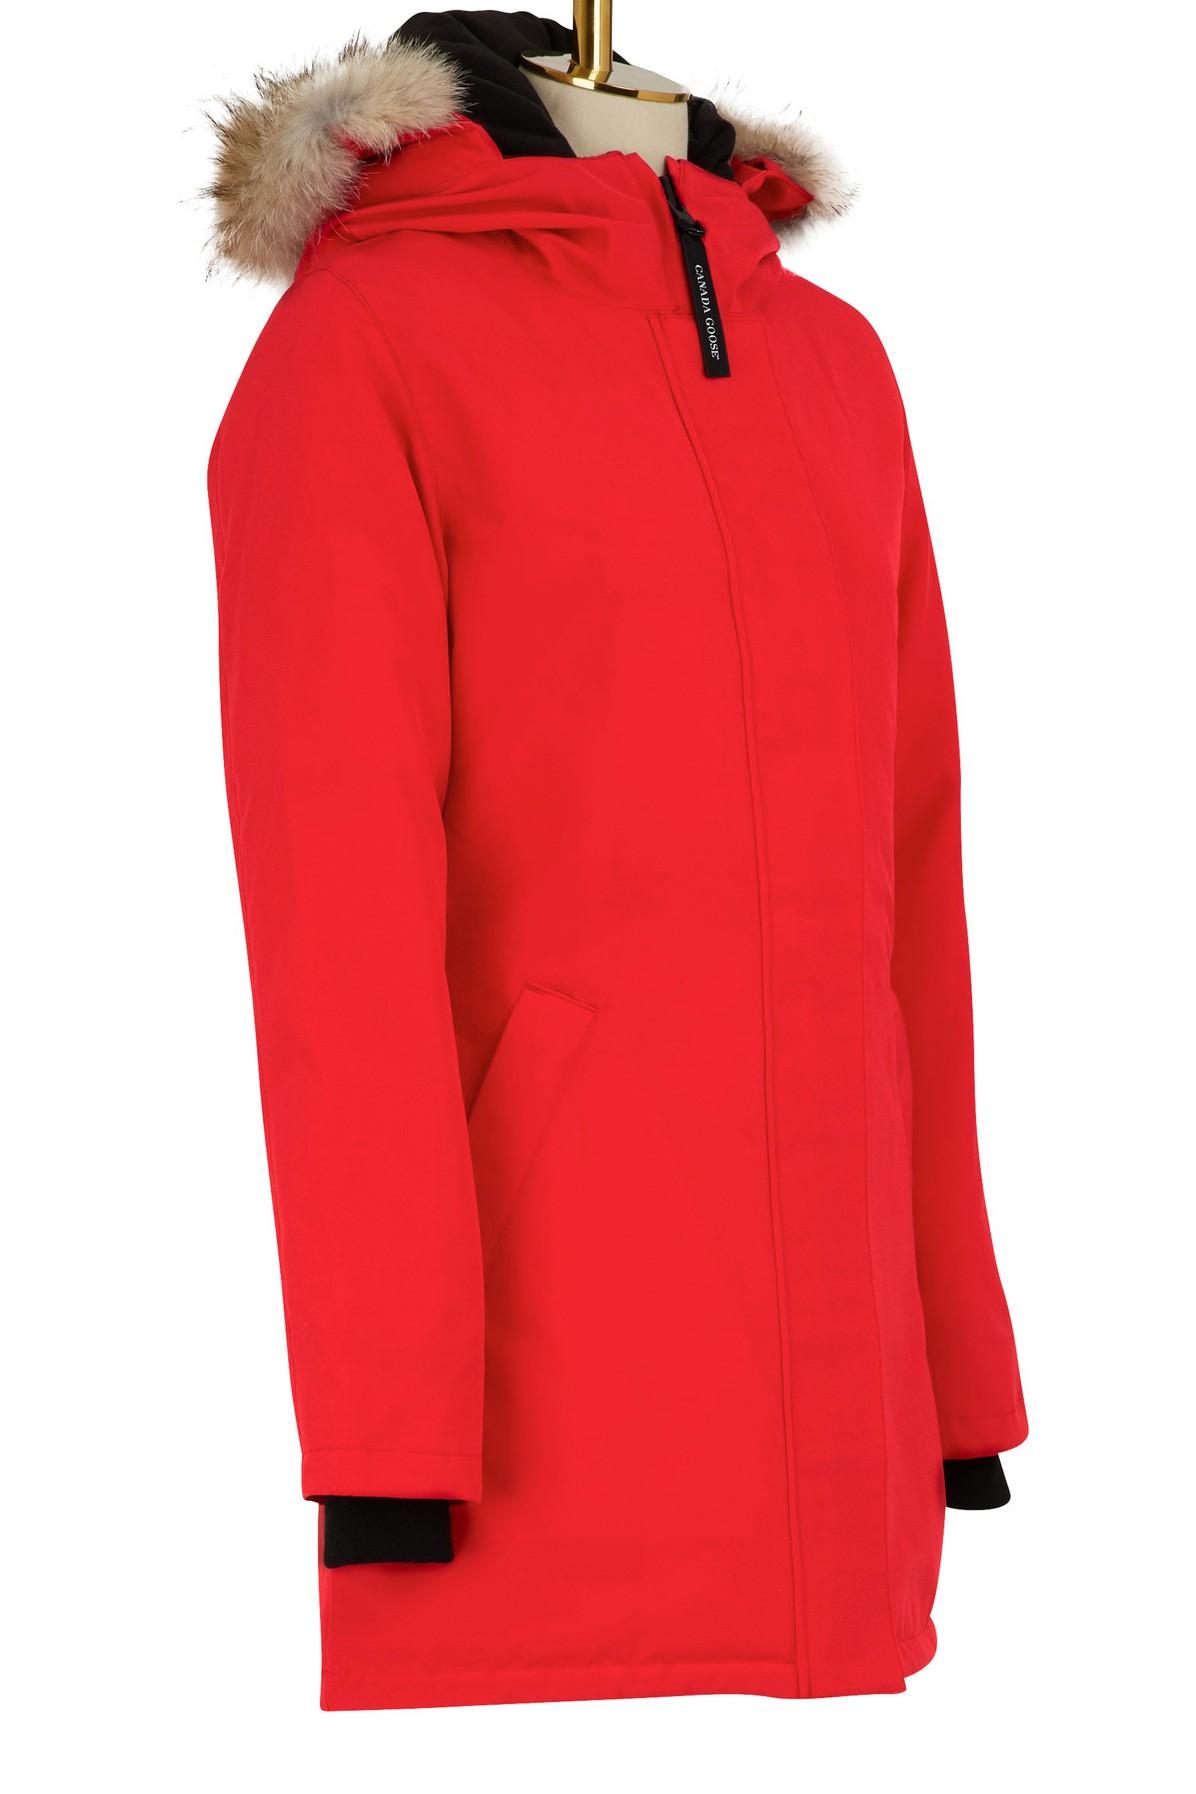 Canada Goose Goose Victoria Parka in Red - Lyst